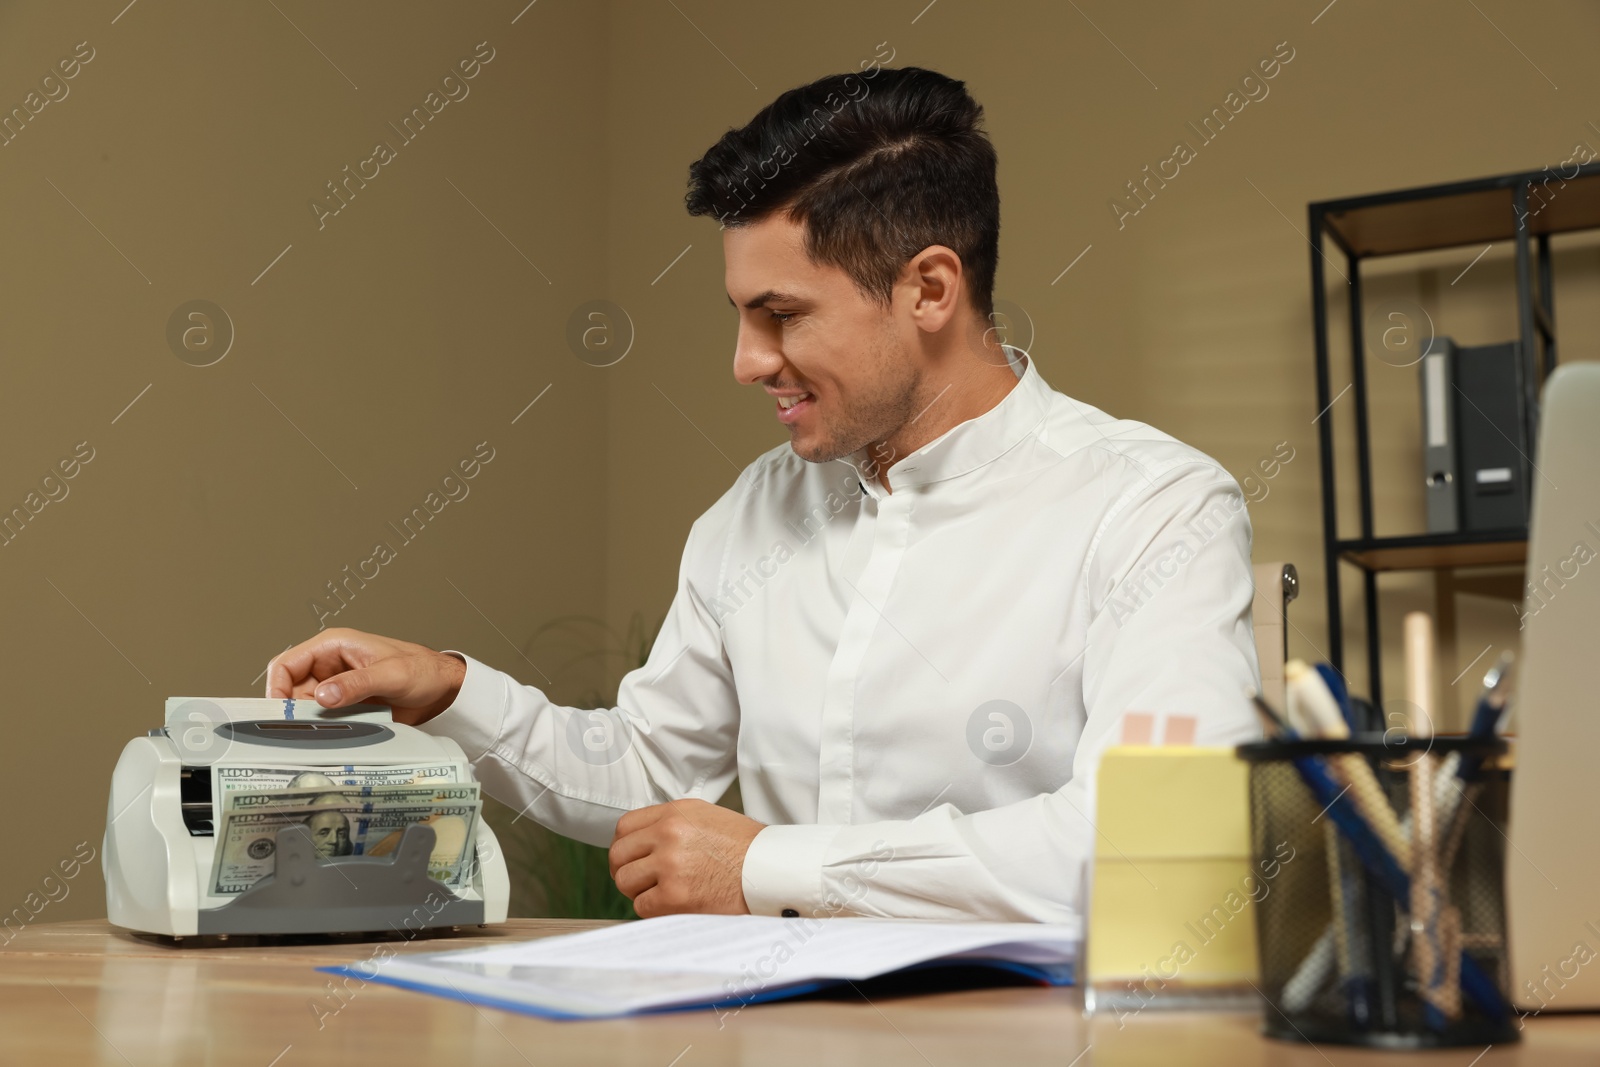 Photo of Man putting money into banknote counter at wooden table indoors